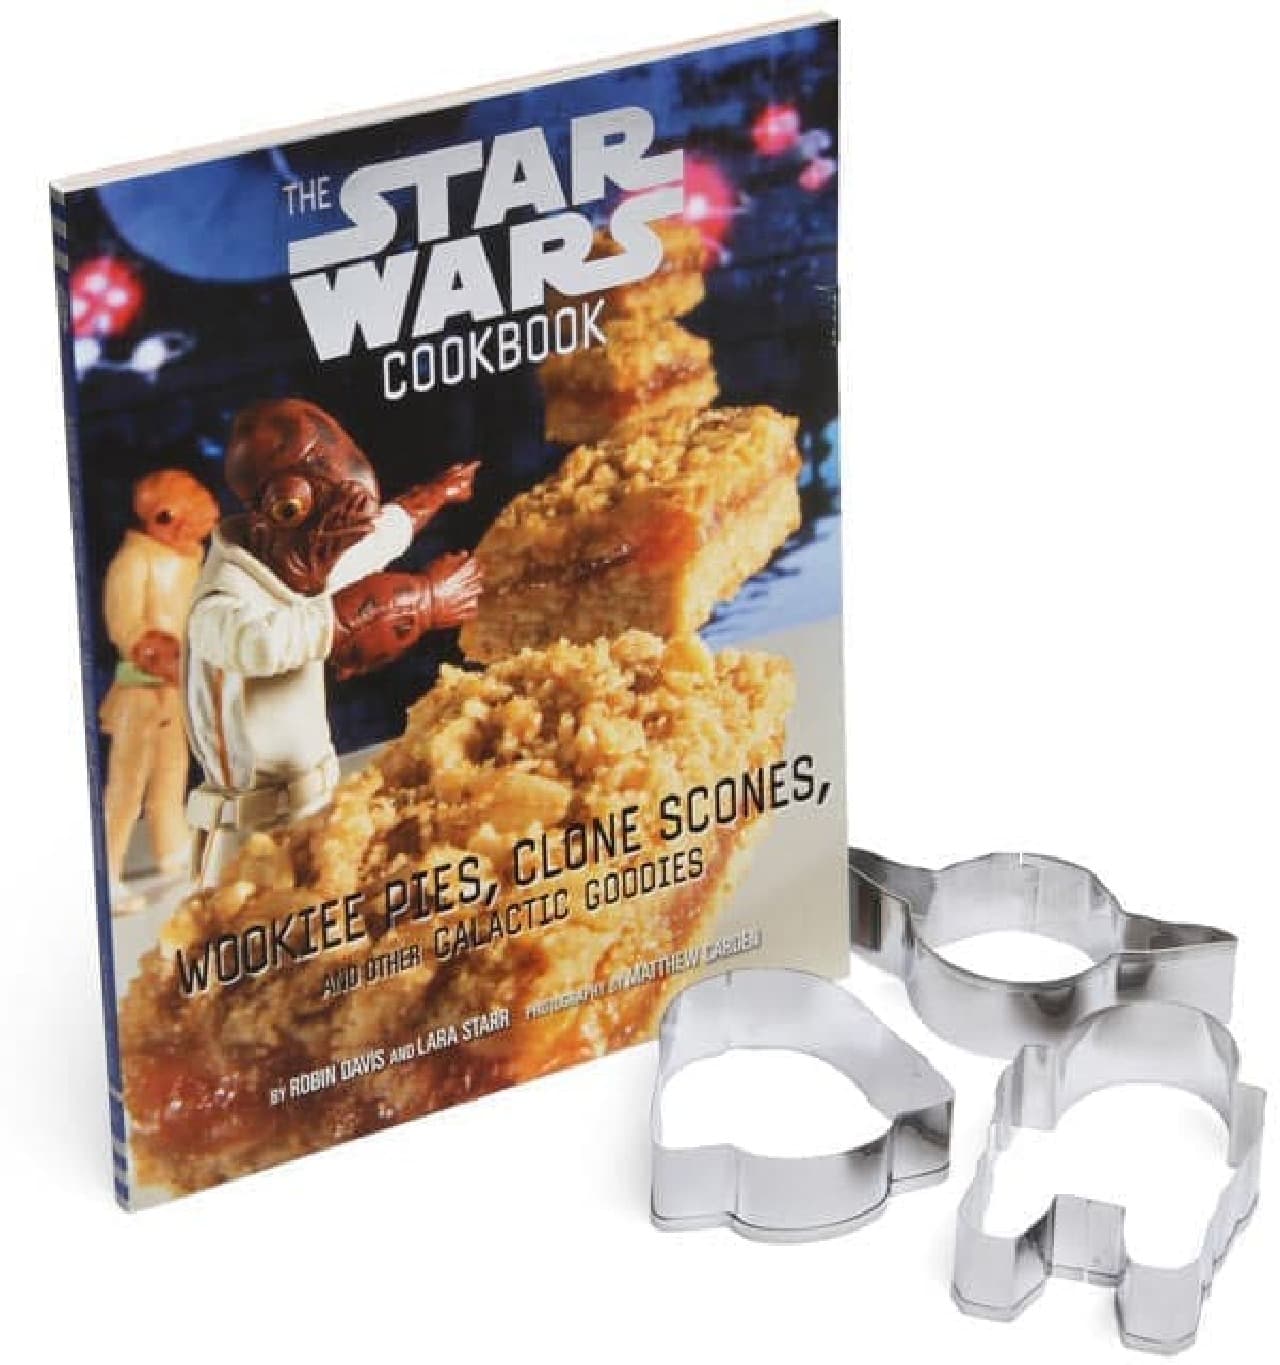 If you cook according to the Star Wars Cookbook